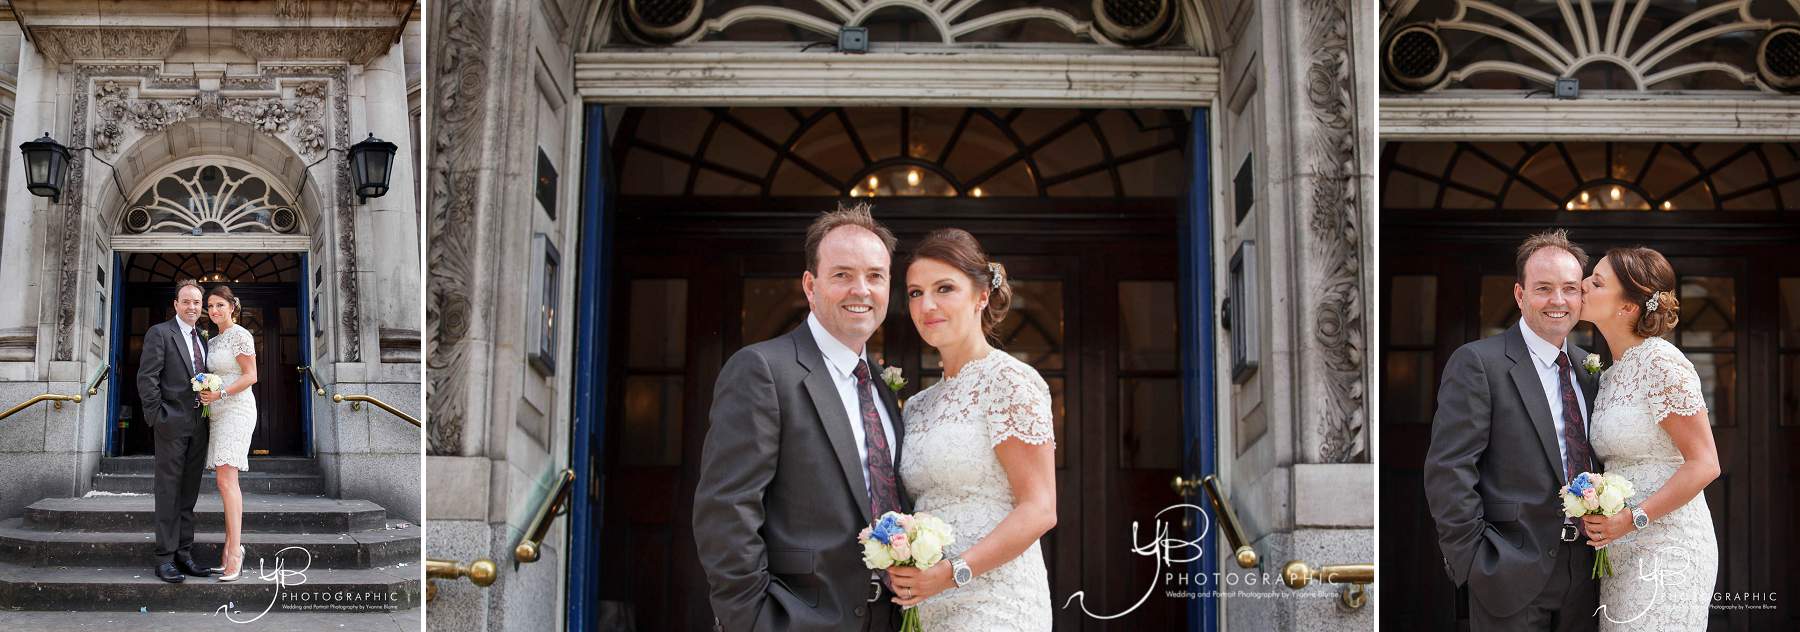 Wedding Photography at Chelsea Register Office by YBPHOTOGRAPHIC